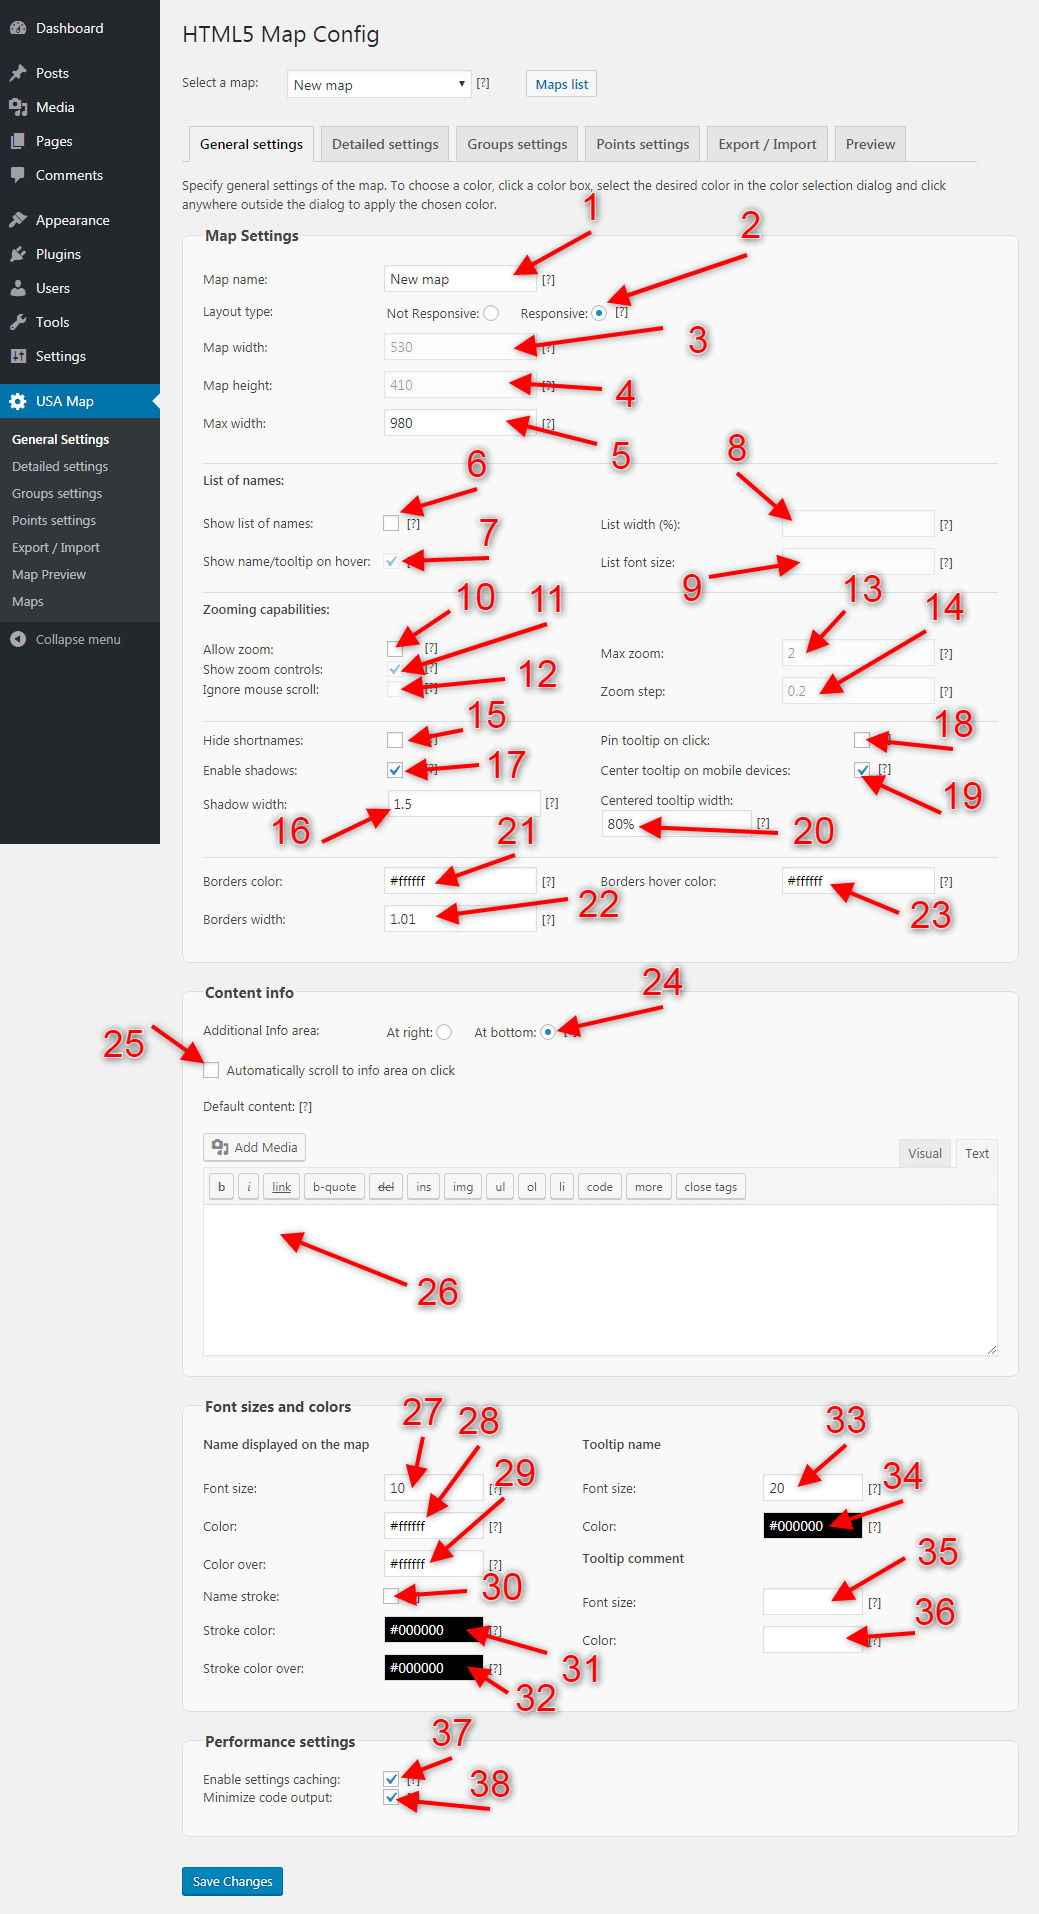 General map settings tab with pointers